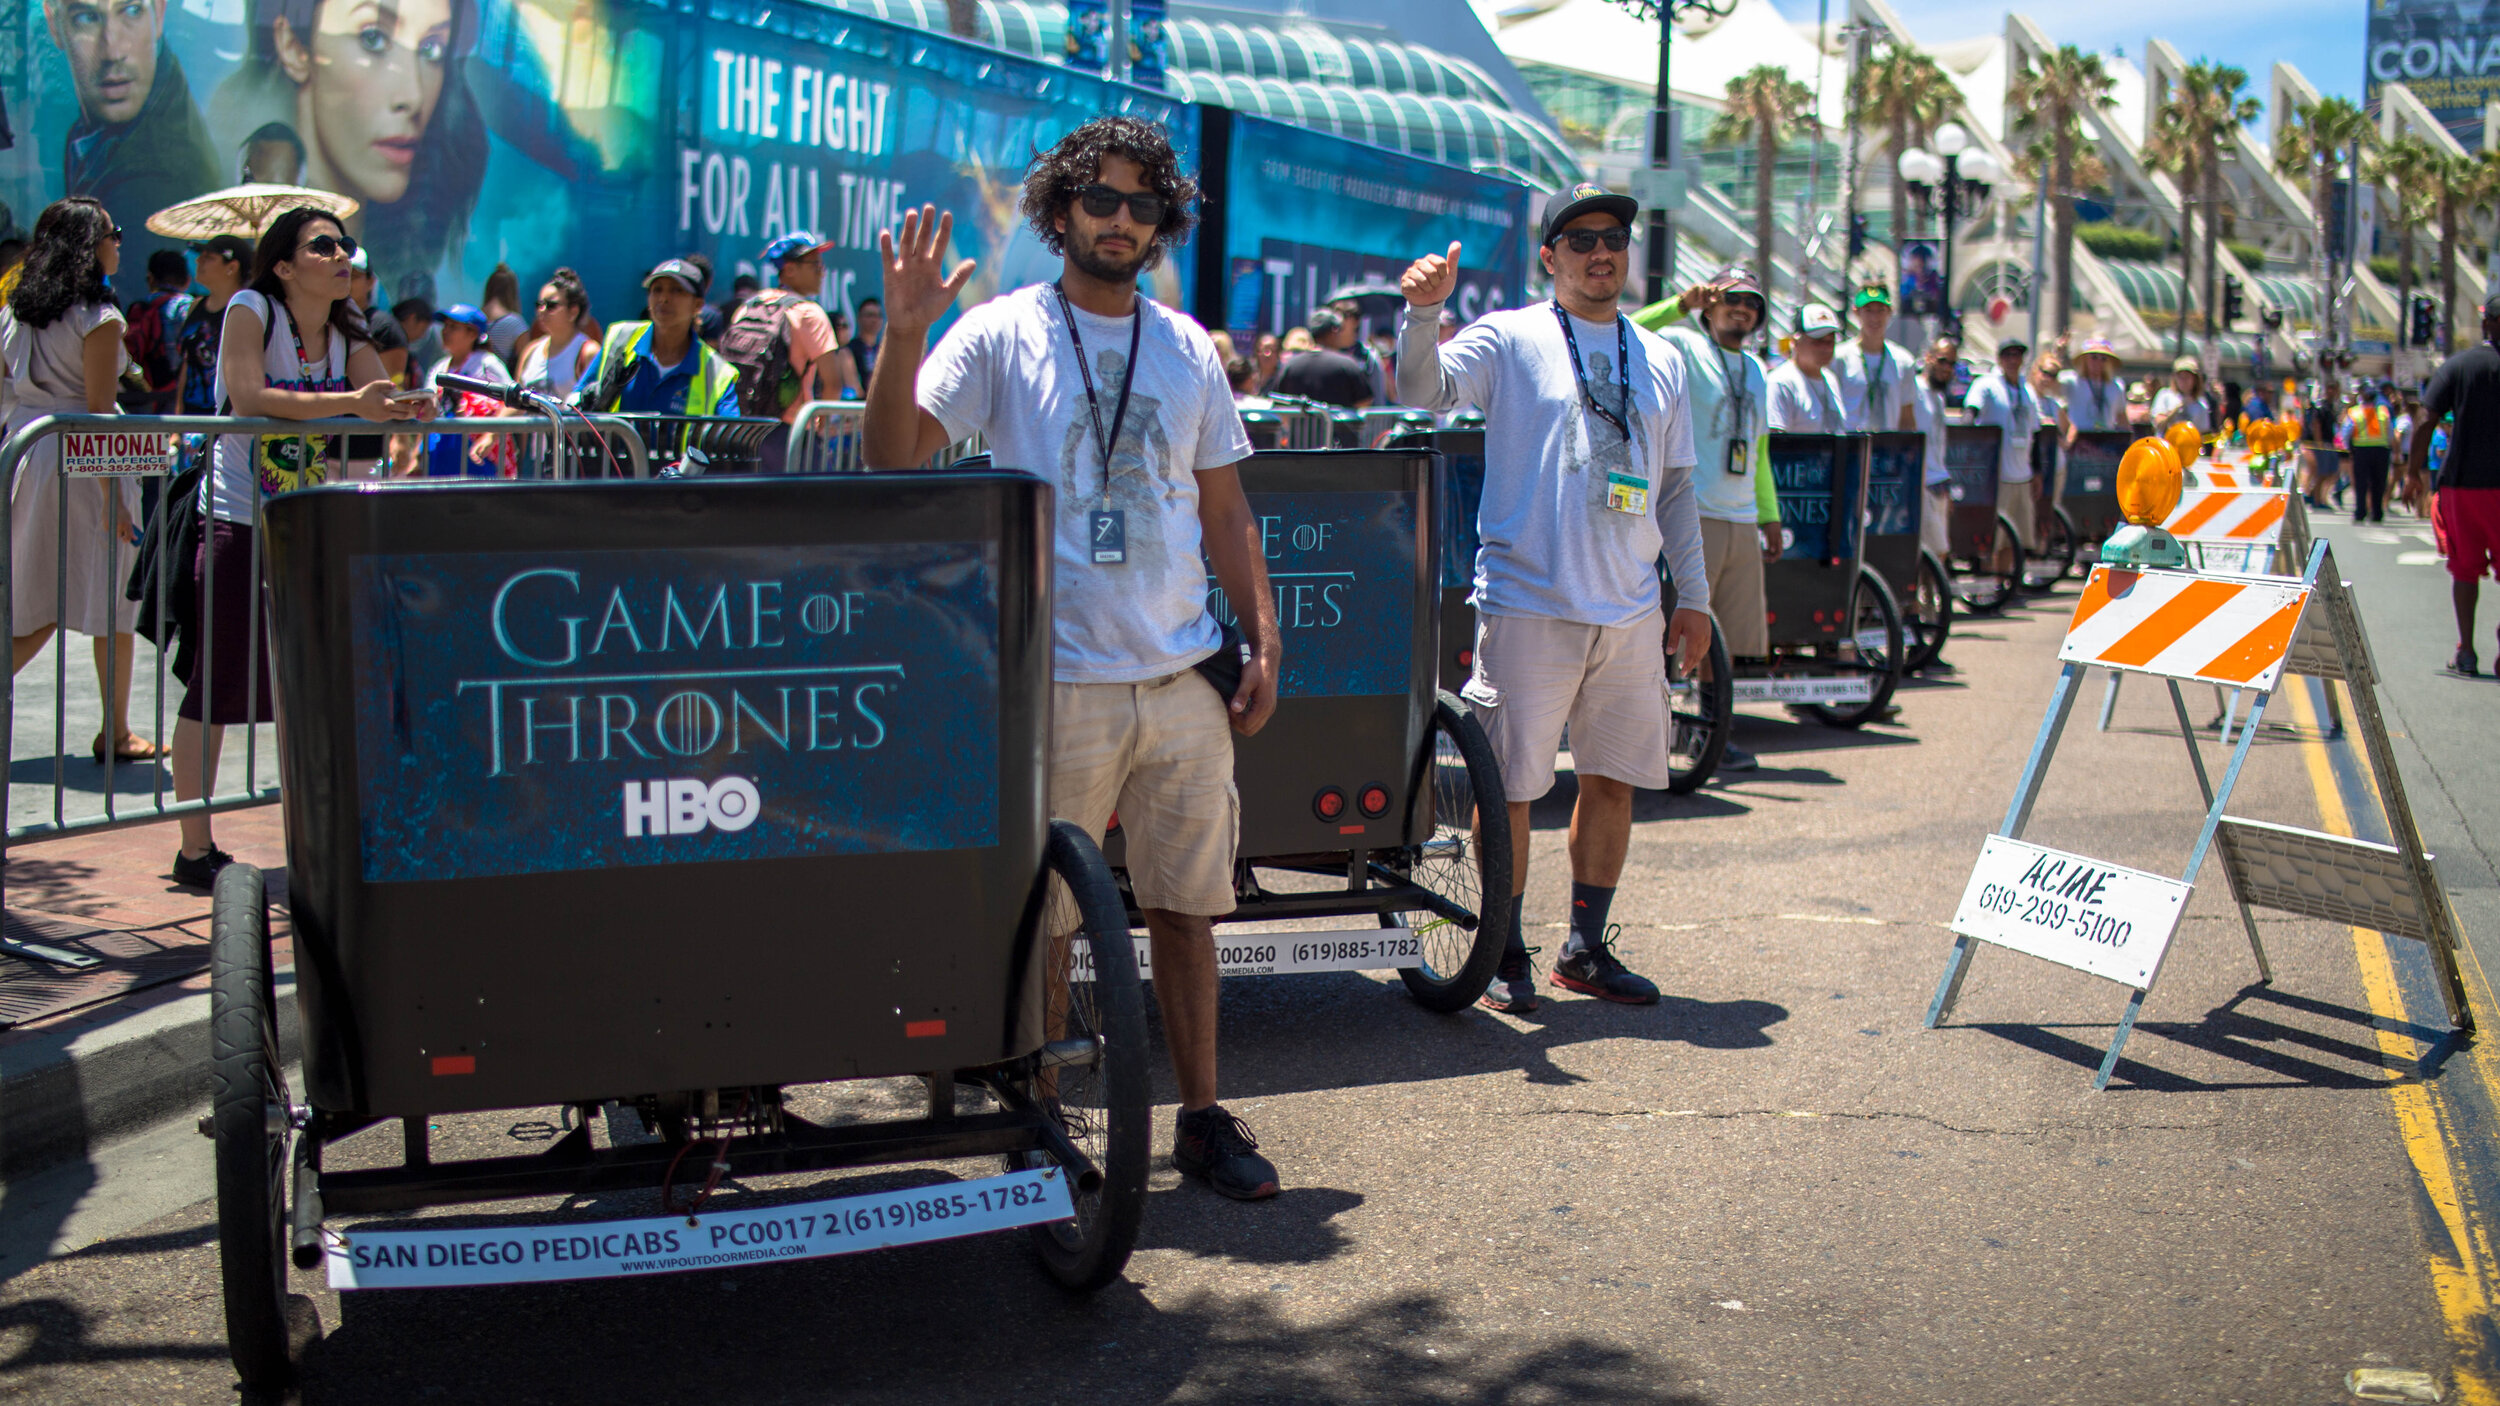 HBO Game of Thrones Comic-Con Pedicabs